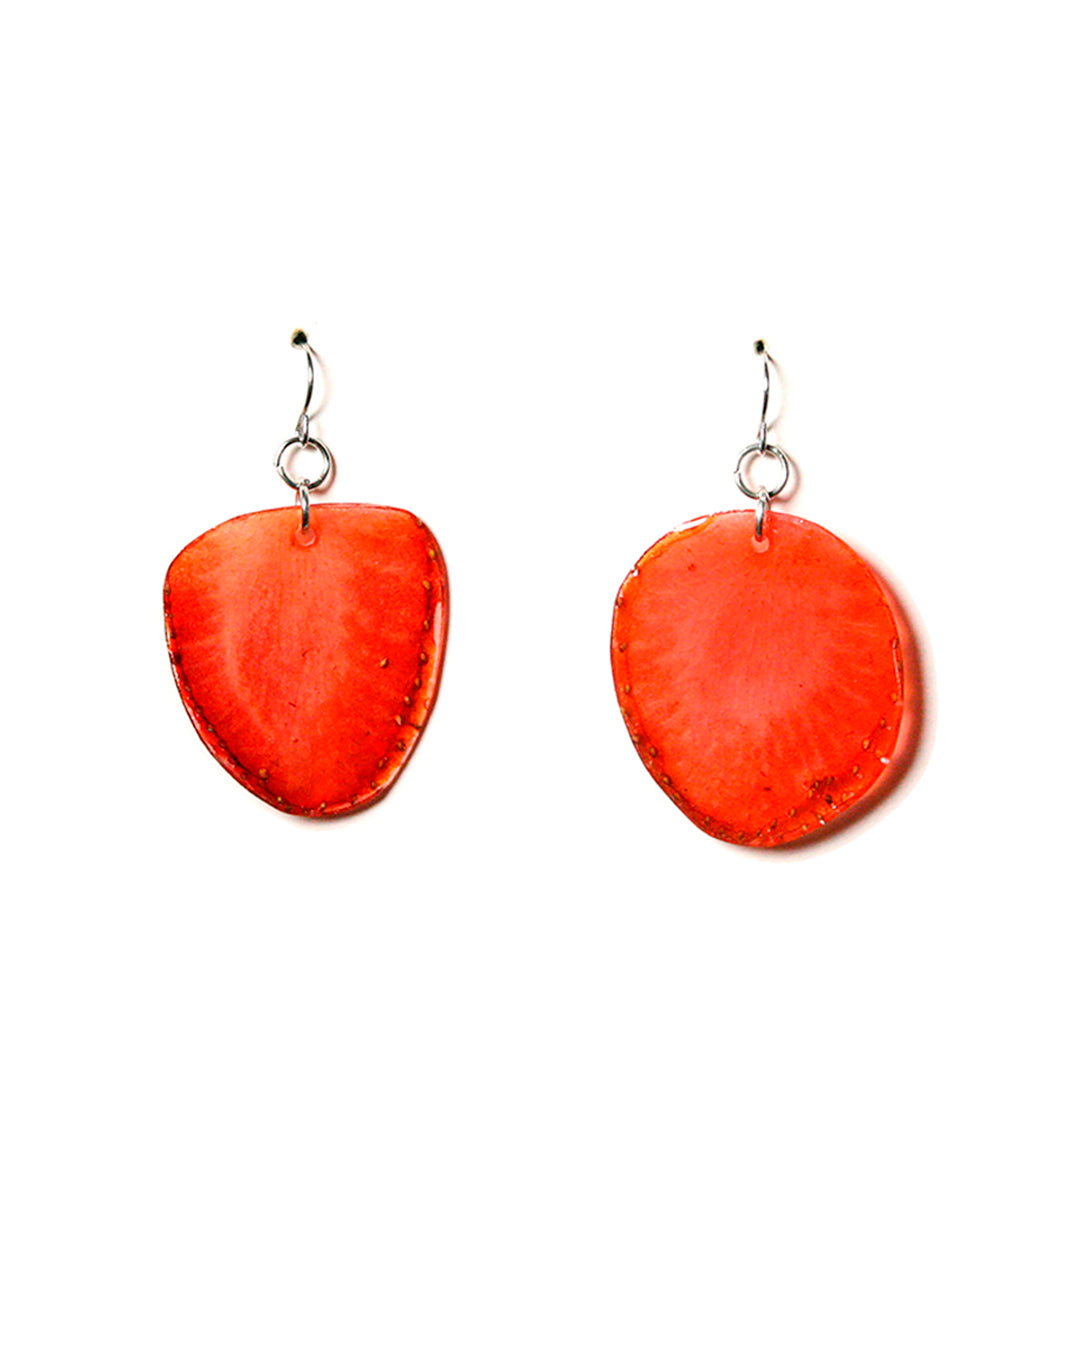 "Berry Special" Earrings - Real Strawberry